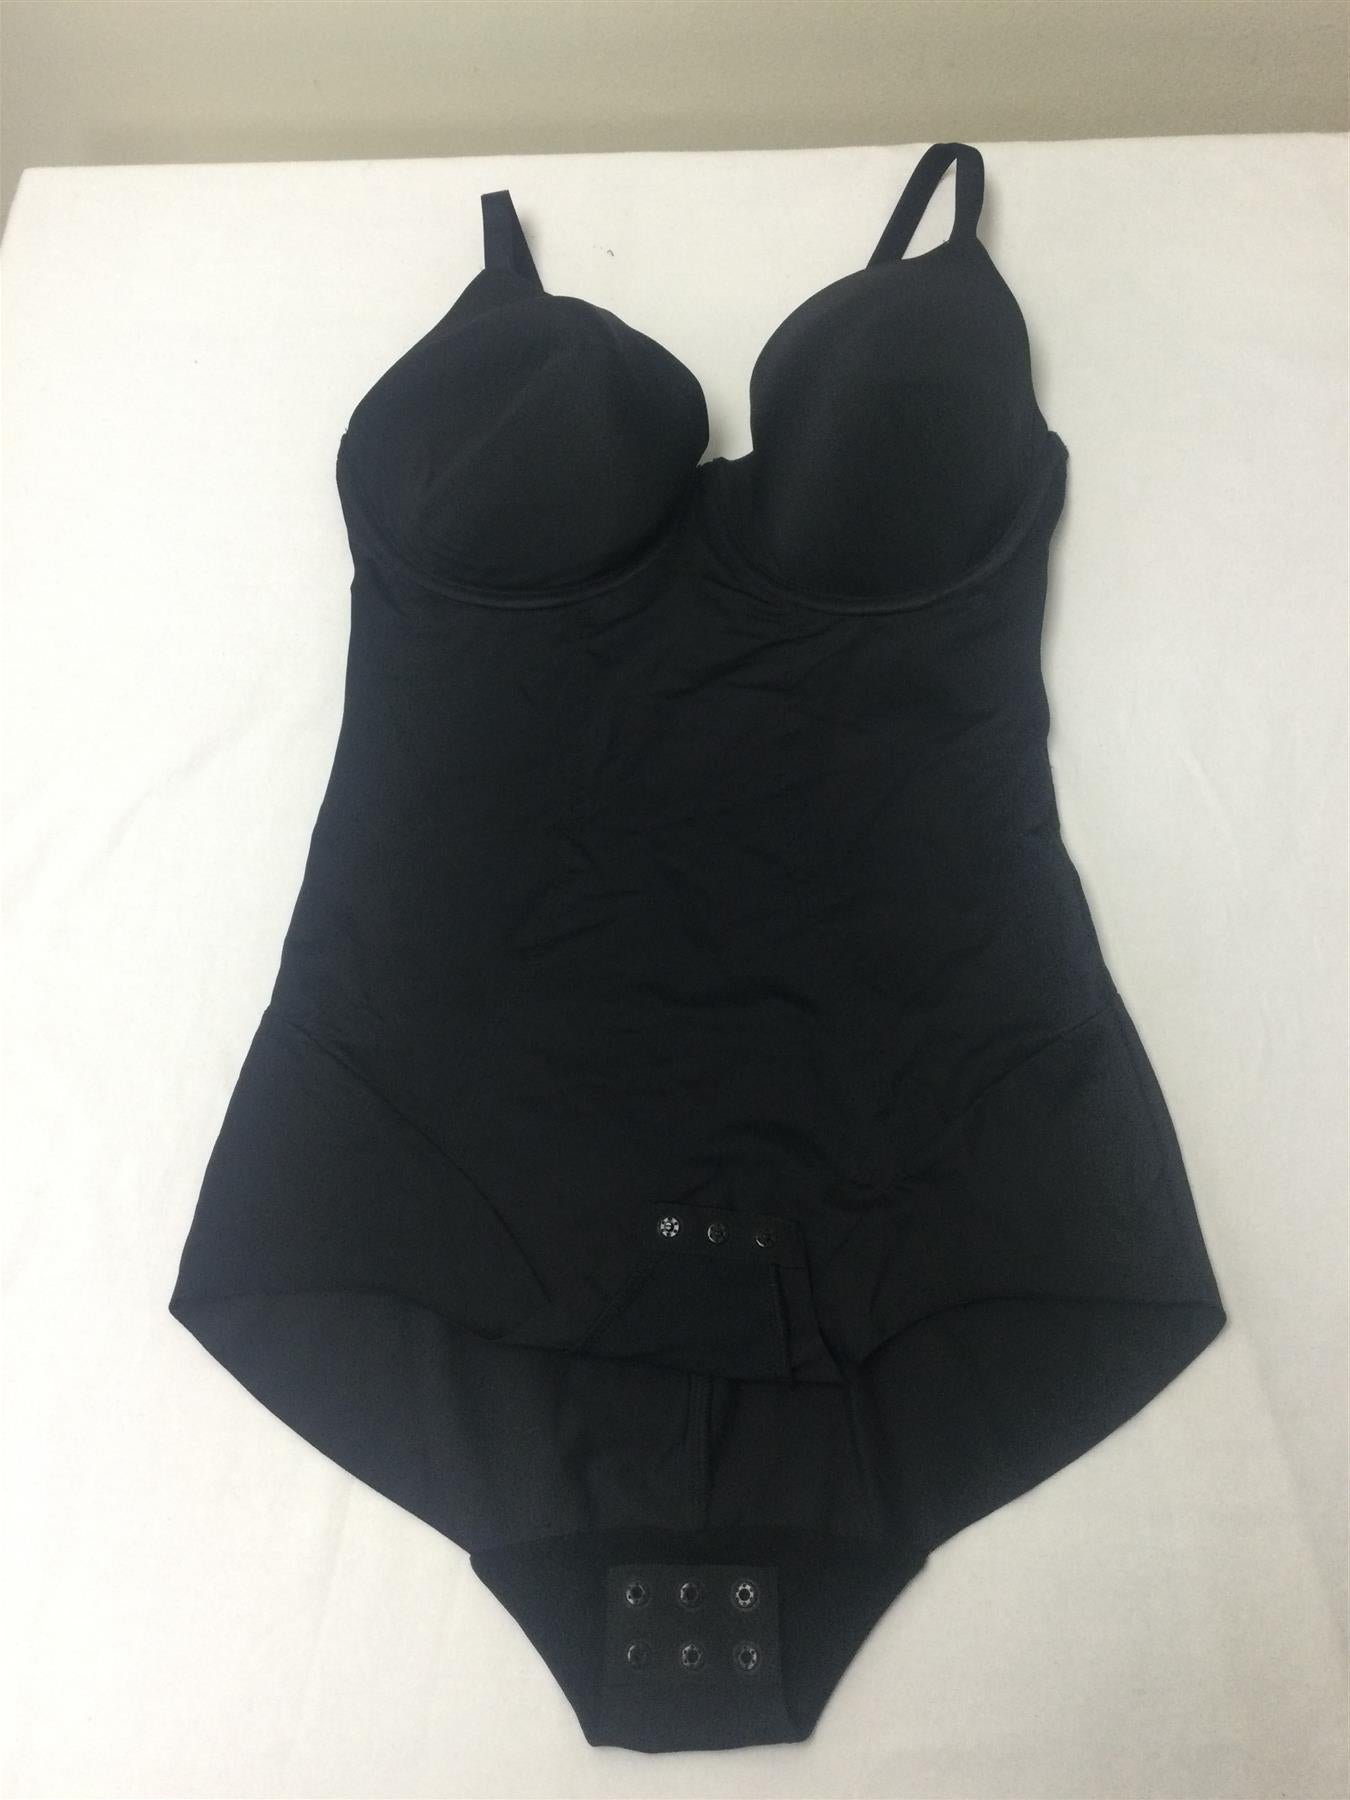 High Street Womens Black Full Cup Body Underwired Shop Soiled